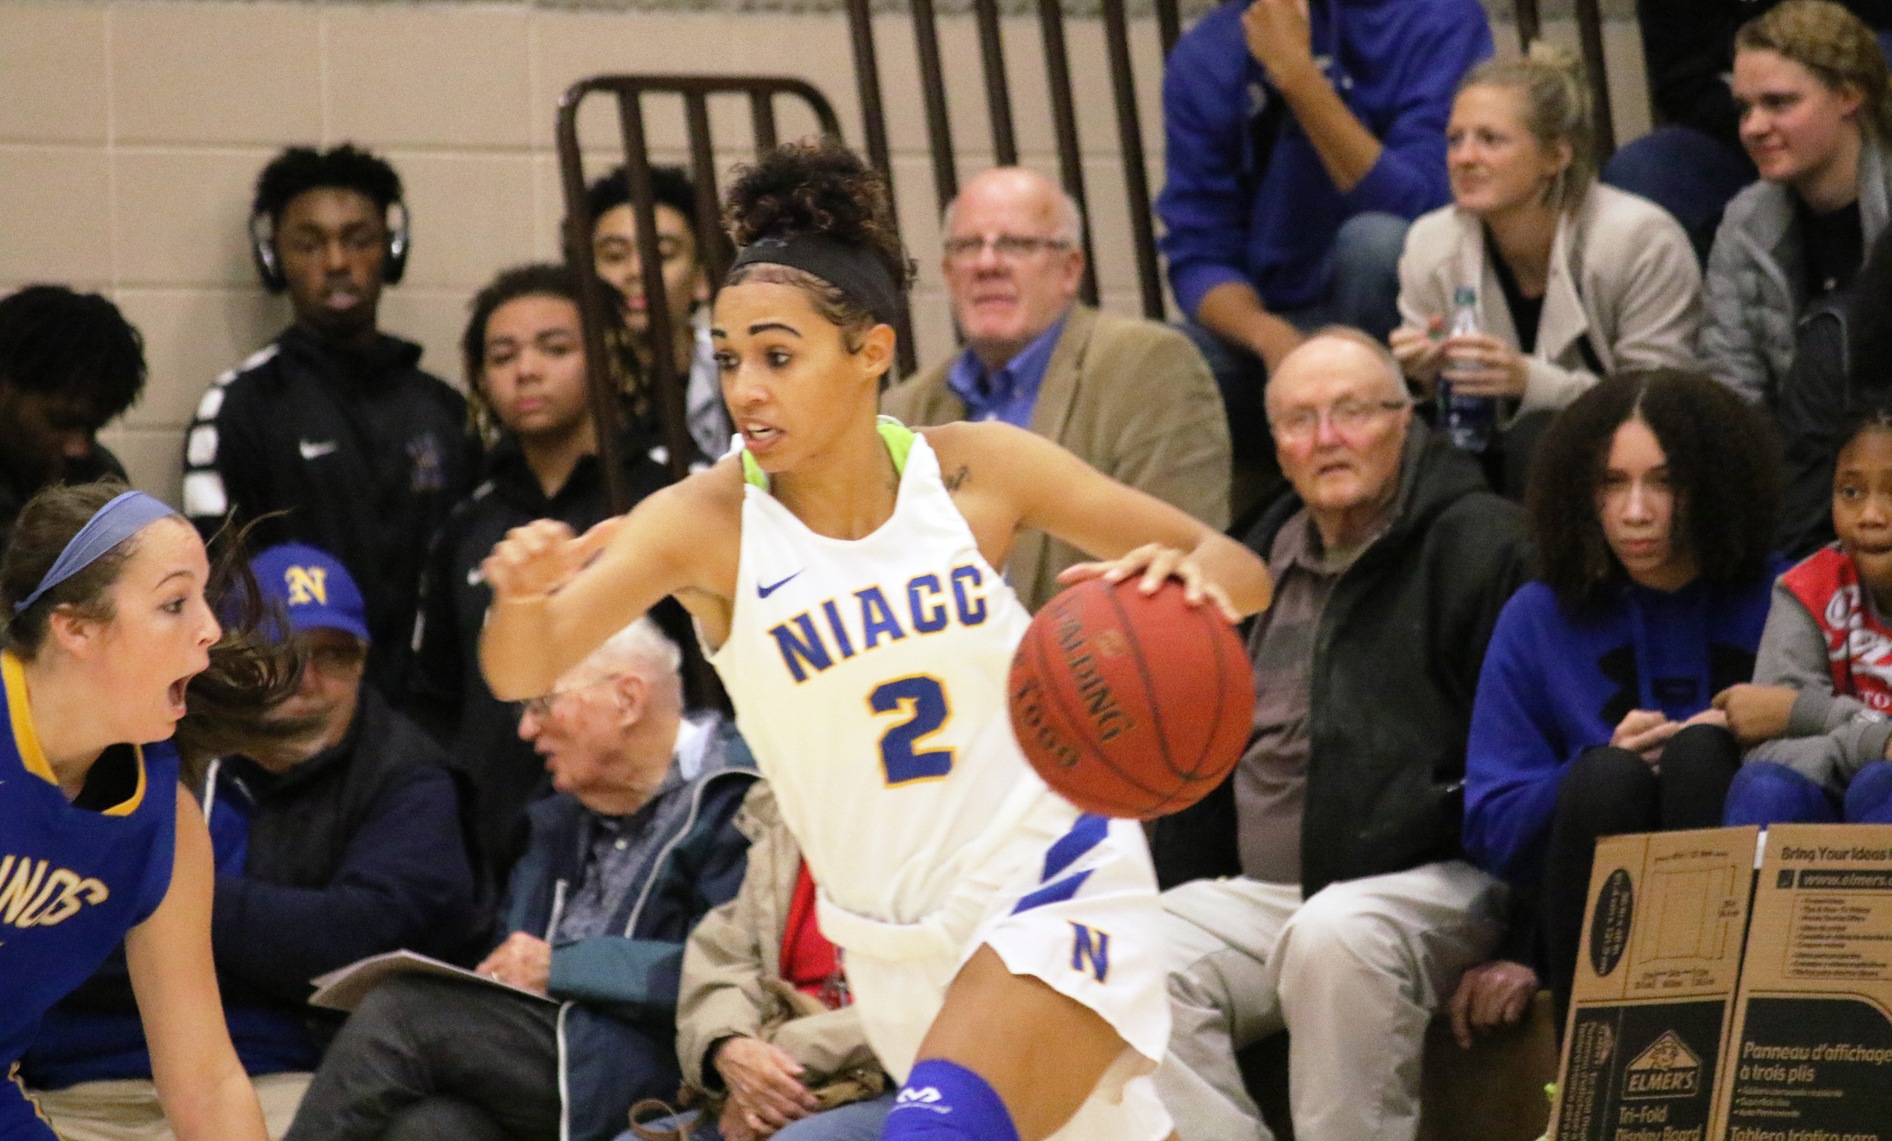 NIACC's Mikayla Homola drives to the basket in last Friday's win over Illinois Central.